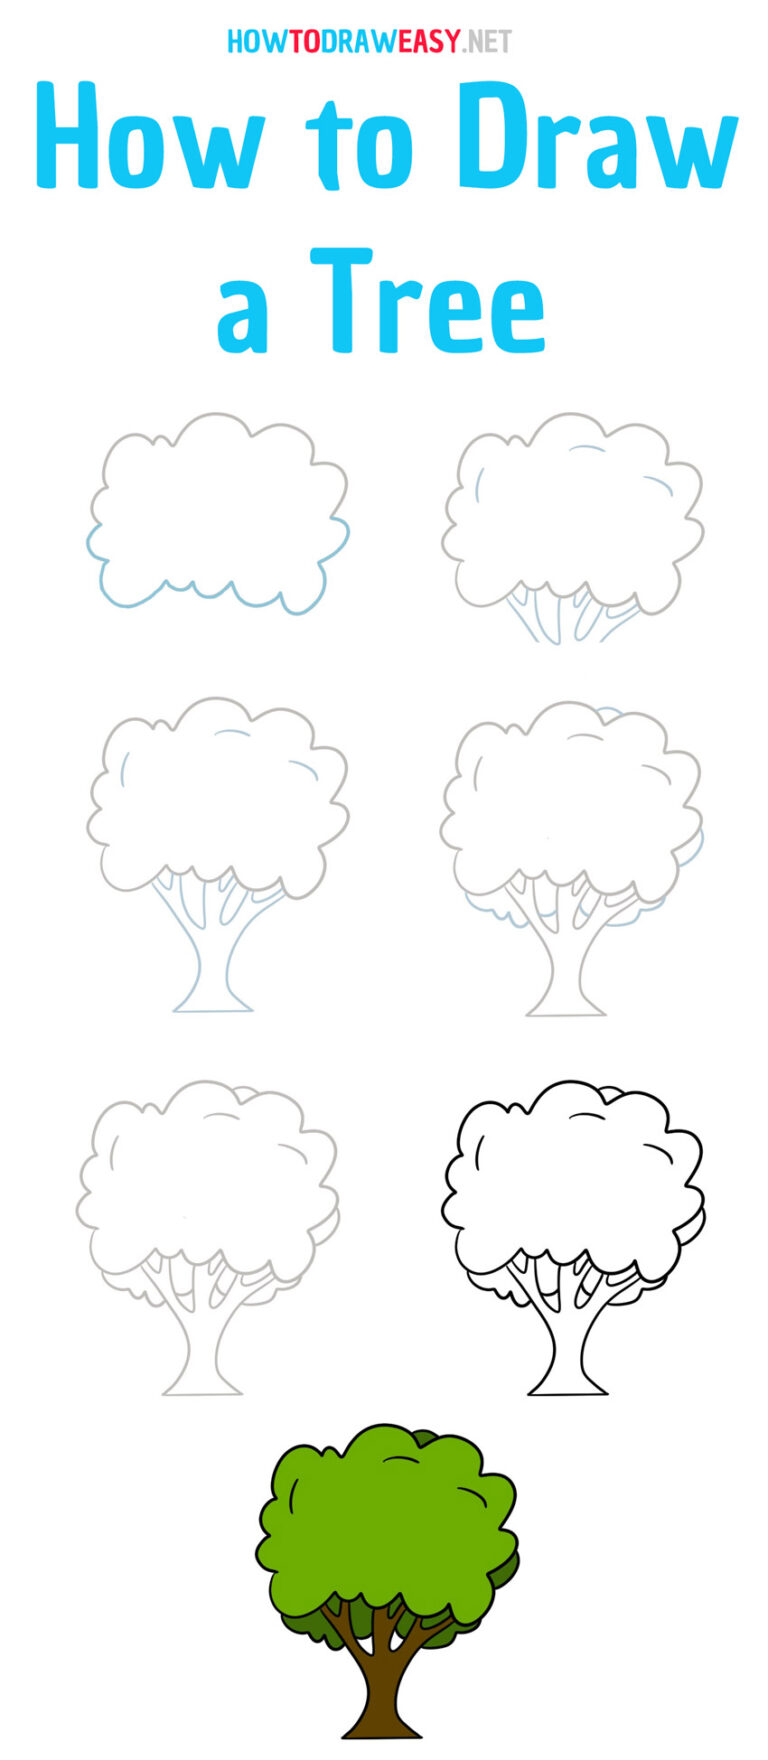 How to Draw a Tree - How to Draw Easy